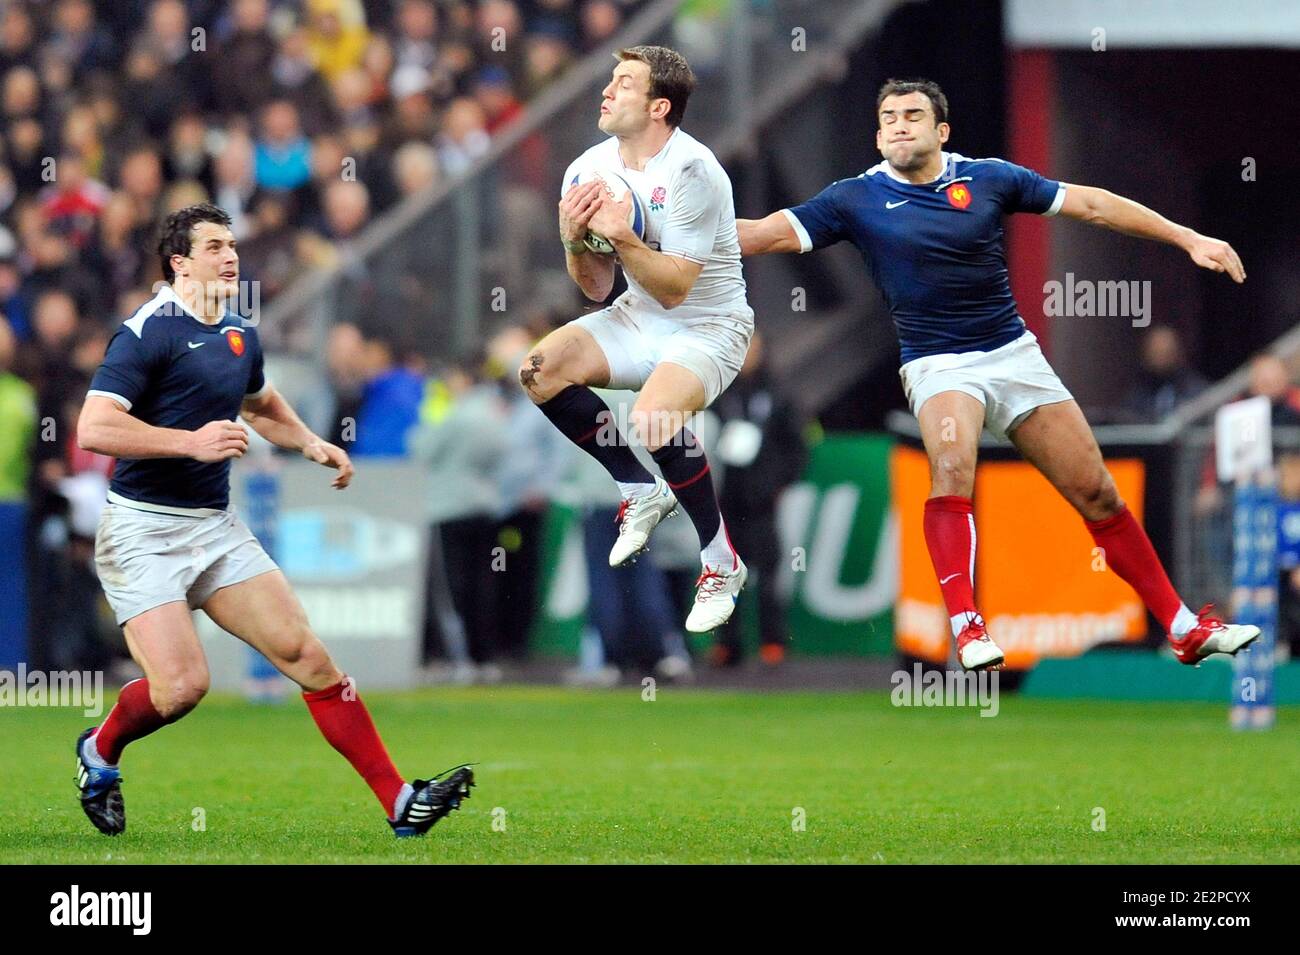 France's Yannick Jauzion, David Marty and England's Mark Cueto during the RBS Six Nations rugby union tournament, France vs England at the Stade de France in Saint-Denis, near Paris, France on March 20, 2010. France defeated England in their last match of the tournament. France won 12-10. Photo by Stephane Reix/ABACAPRESS.COM Stock Photo